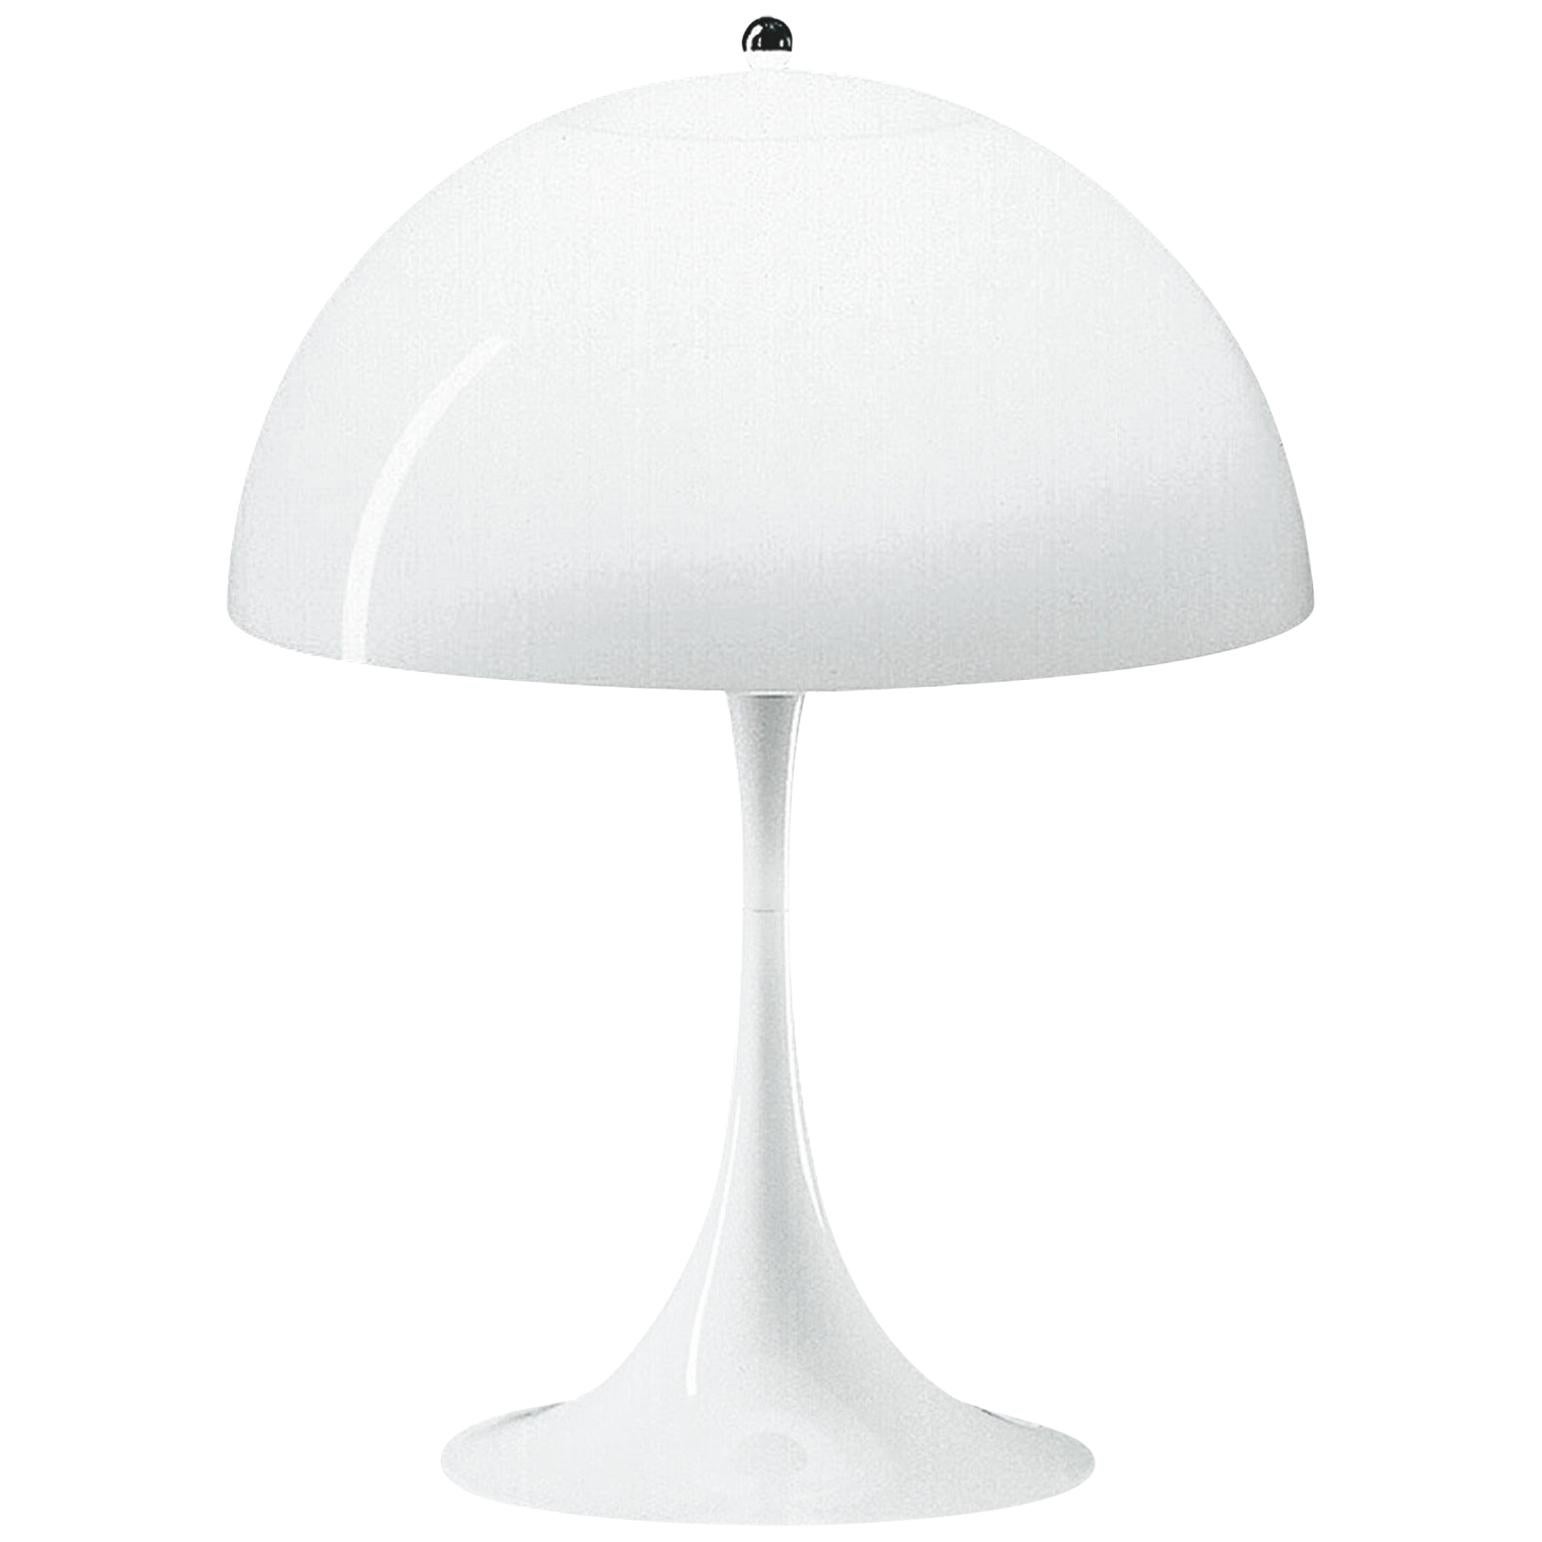 Louis Poulsen Panthella 400 Table Lamp in White Opal by Verner Panton For Sale